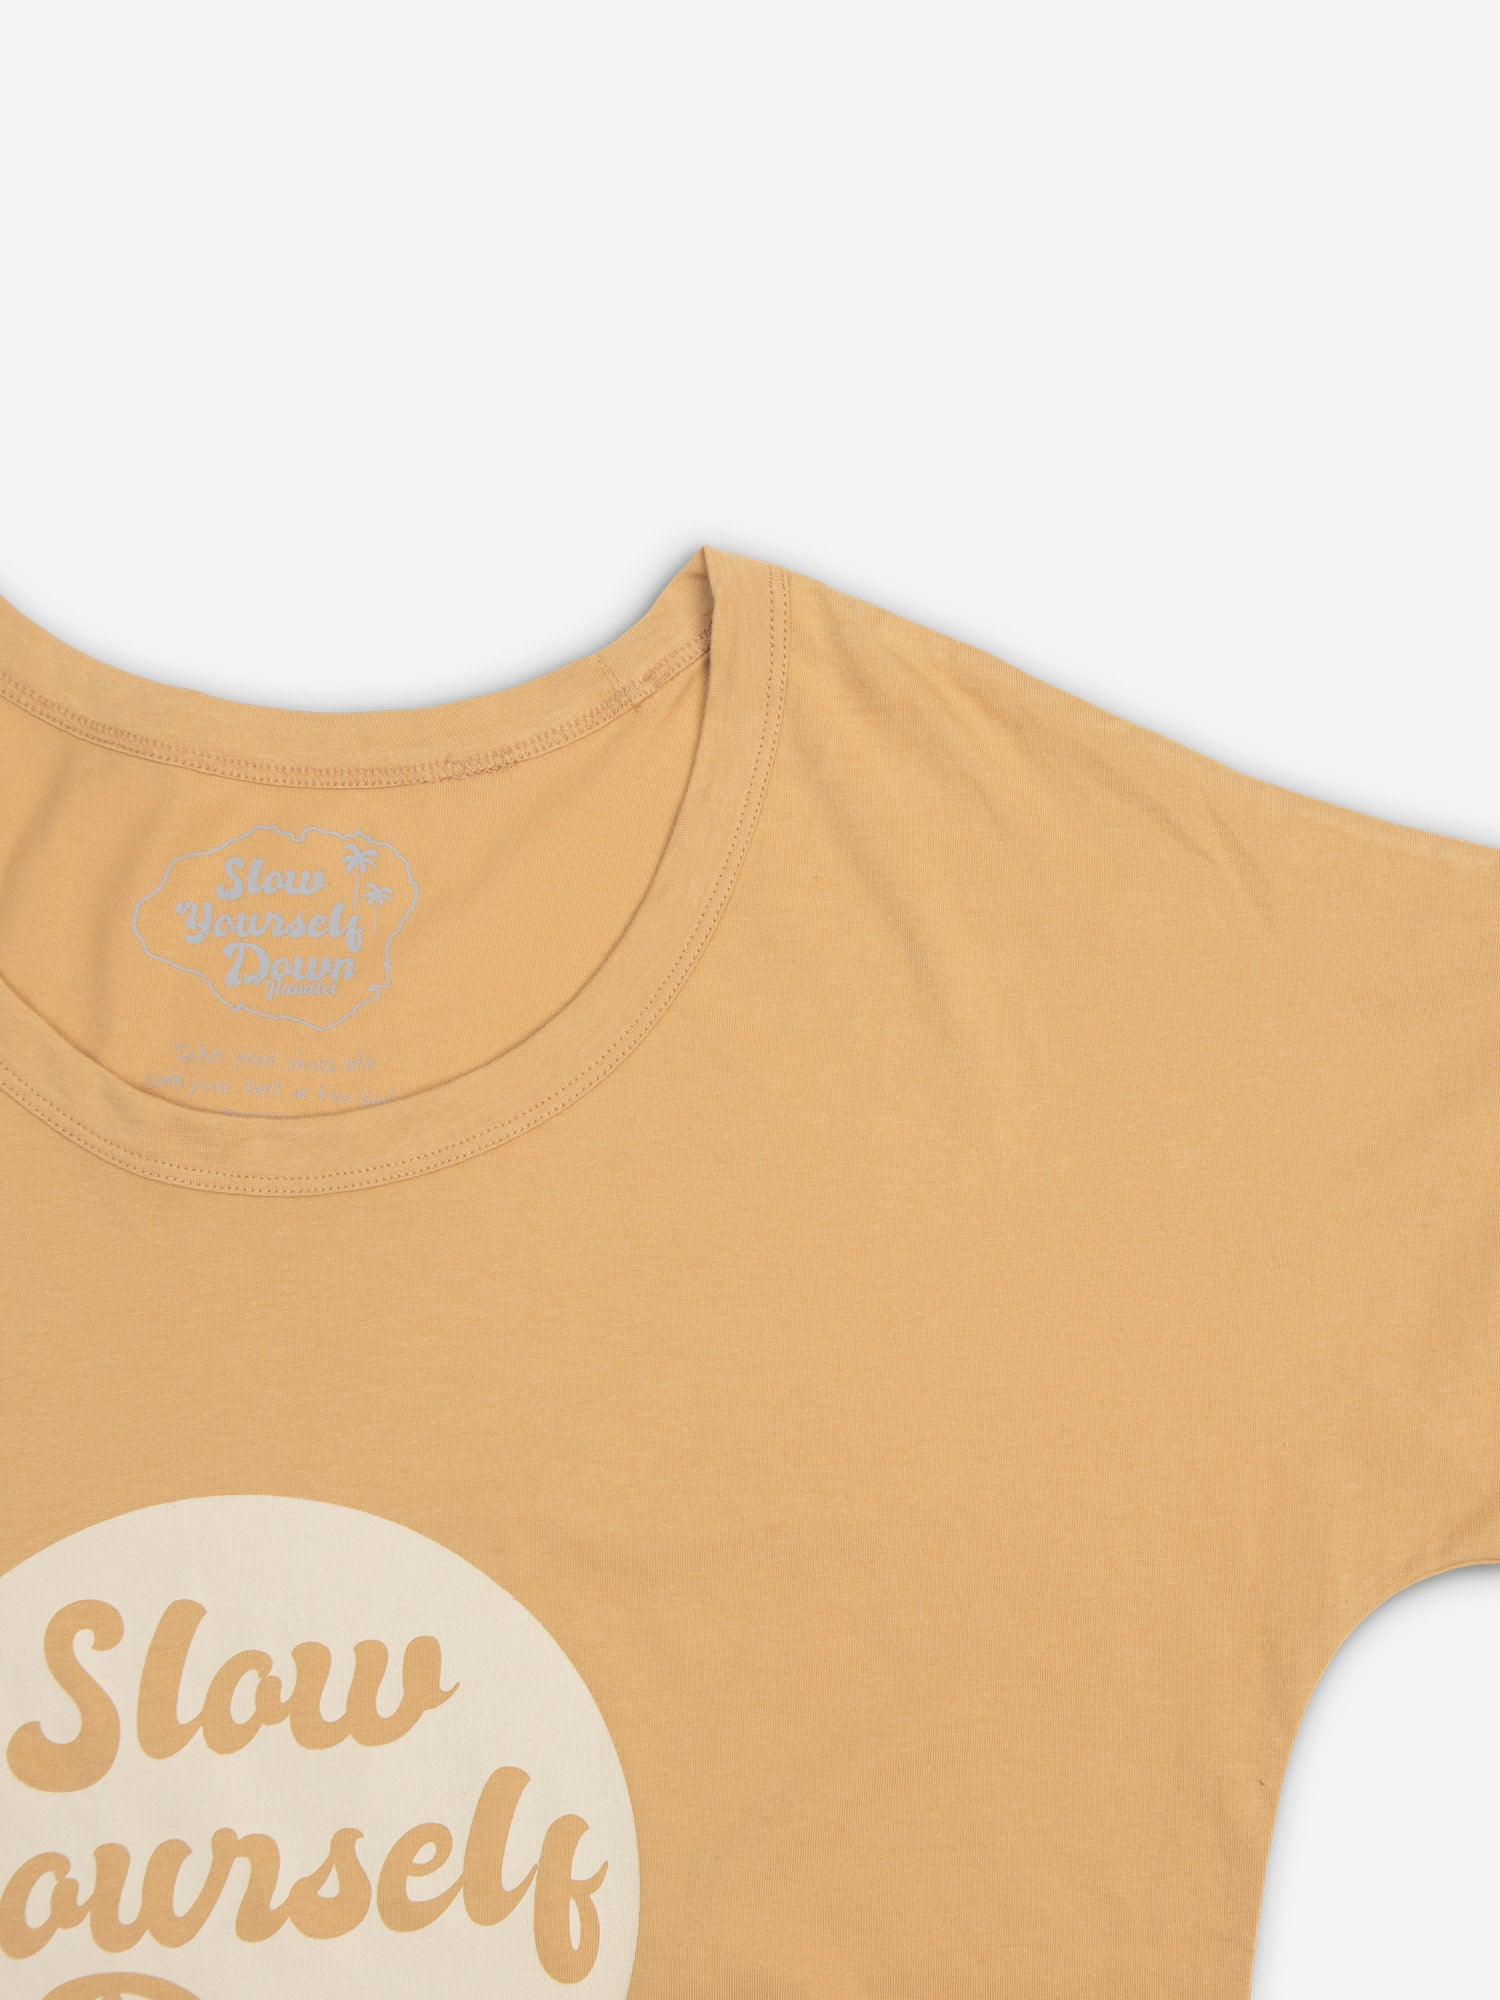 Retro Scoop Neck Tee Womens Shirts - Slow Yourself Down